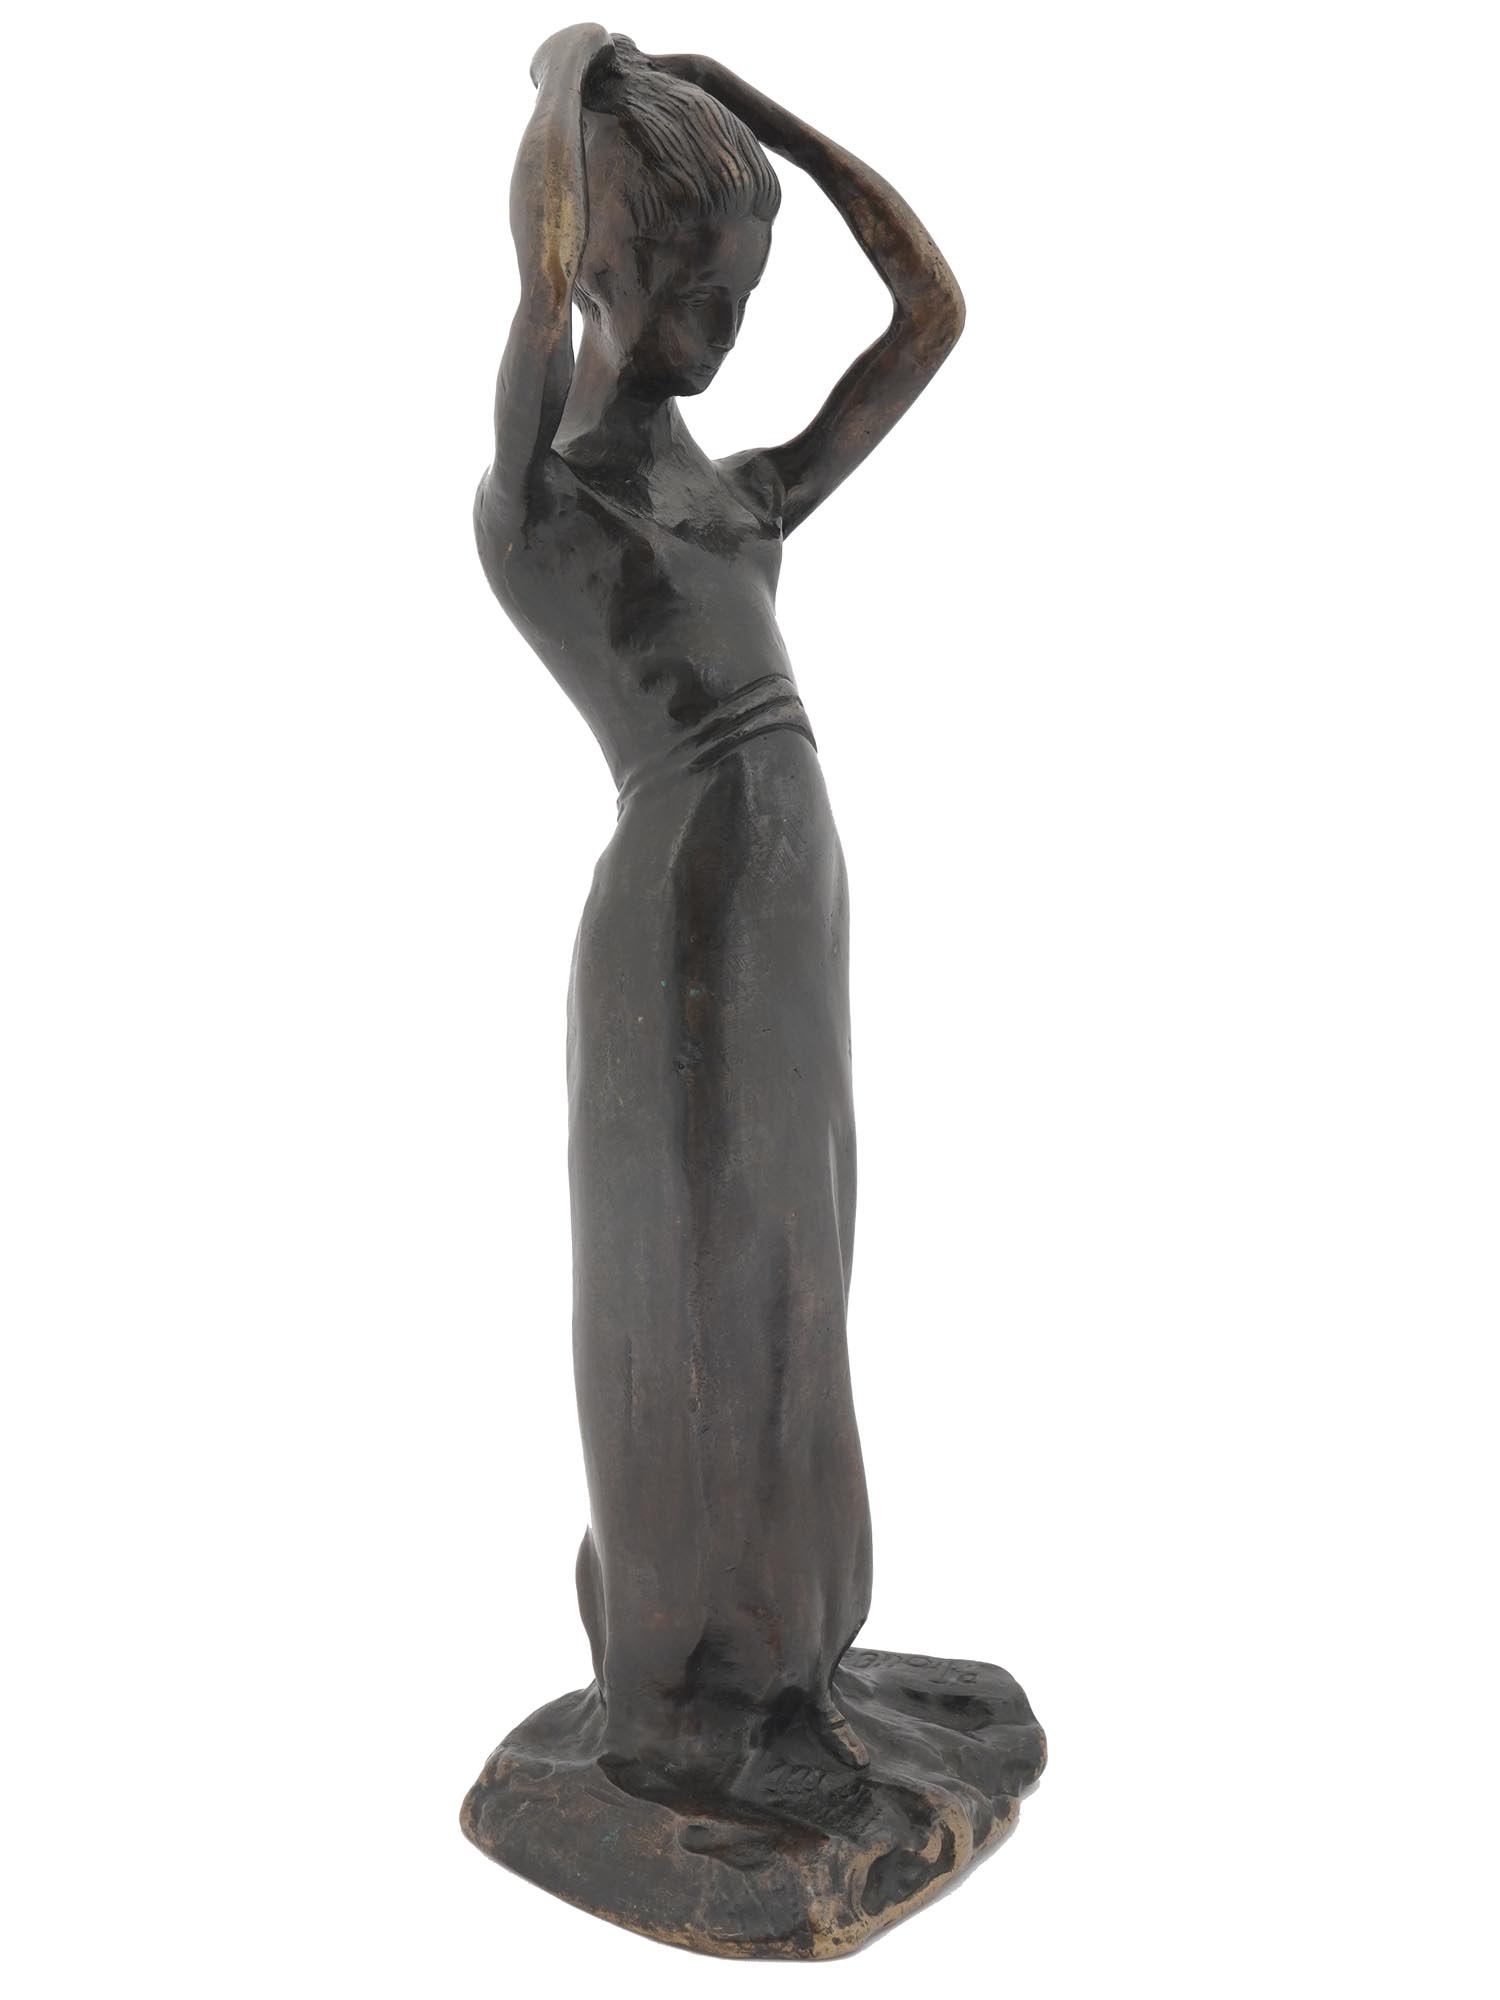 RUSSIAN BRONZE BY PAOLO TROUBETZKOY W PROVENANCE PIC-0